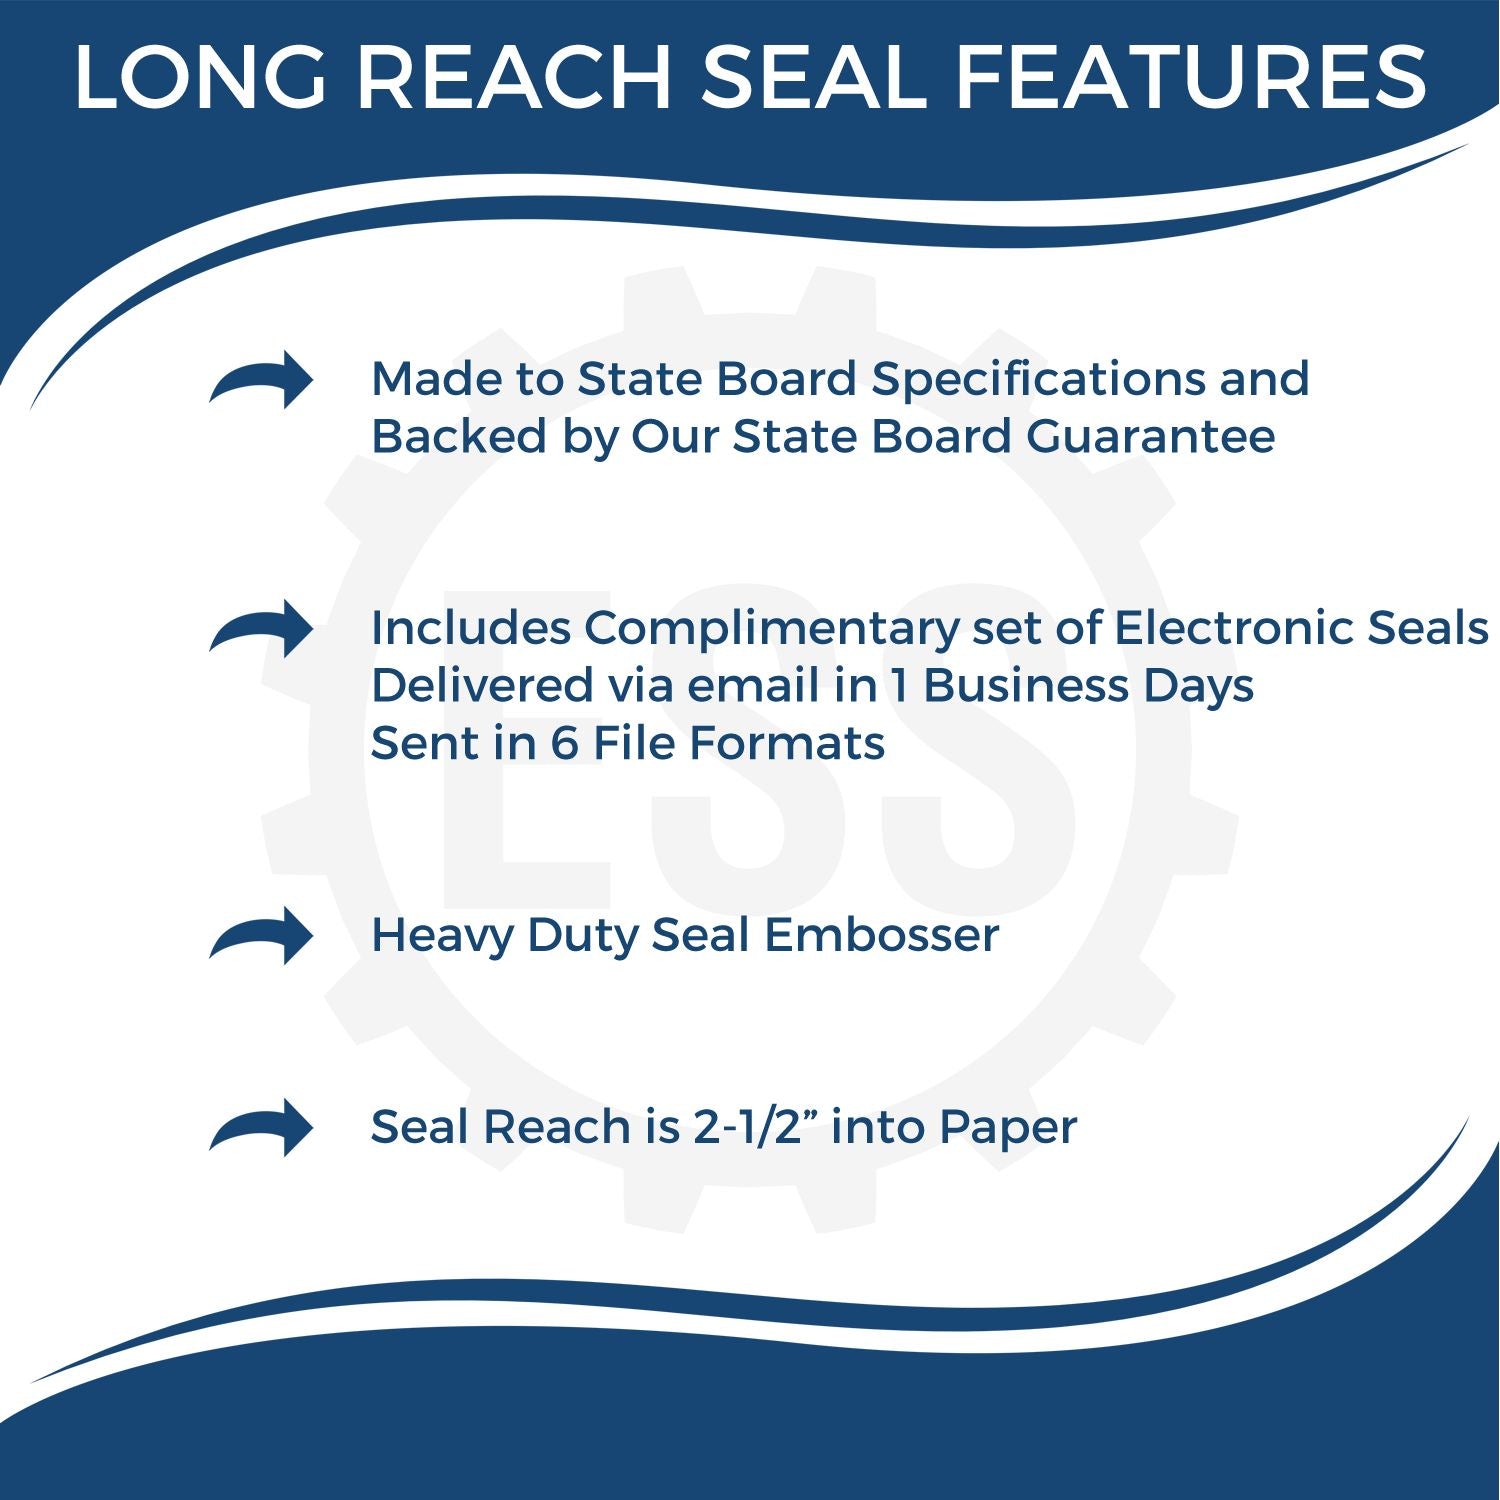 The main image for the Long Reach Alabama PE Seal depicting a sample of the imprint and electronic files